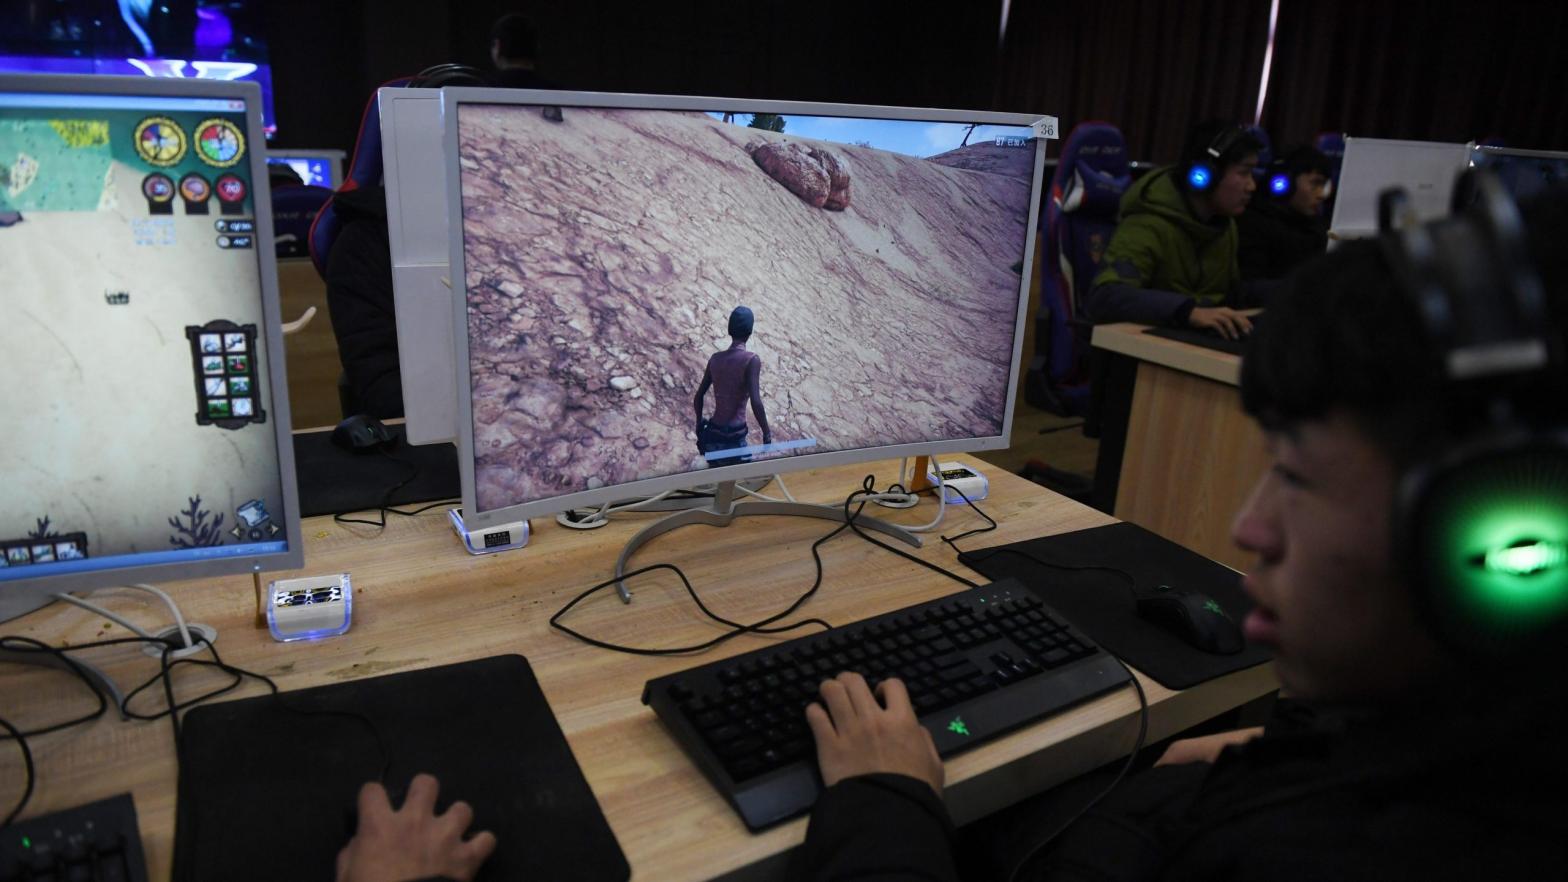 Students playing video games as part of an eSports class at Lanxiang technical school in Jinan, Shangong province, in January 2018. (Photo: Greg Baker / AFP, Getty Images)